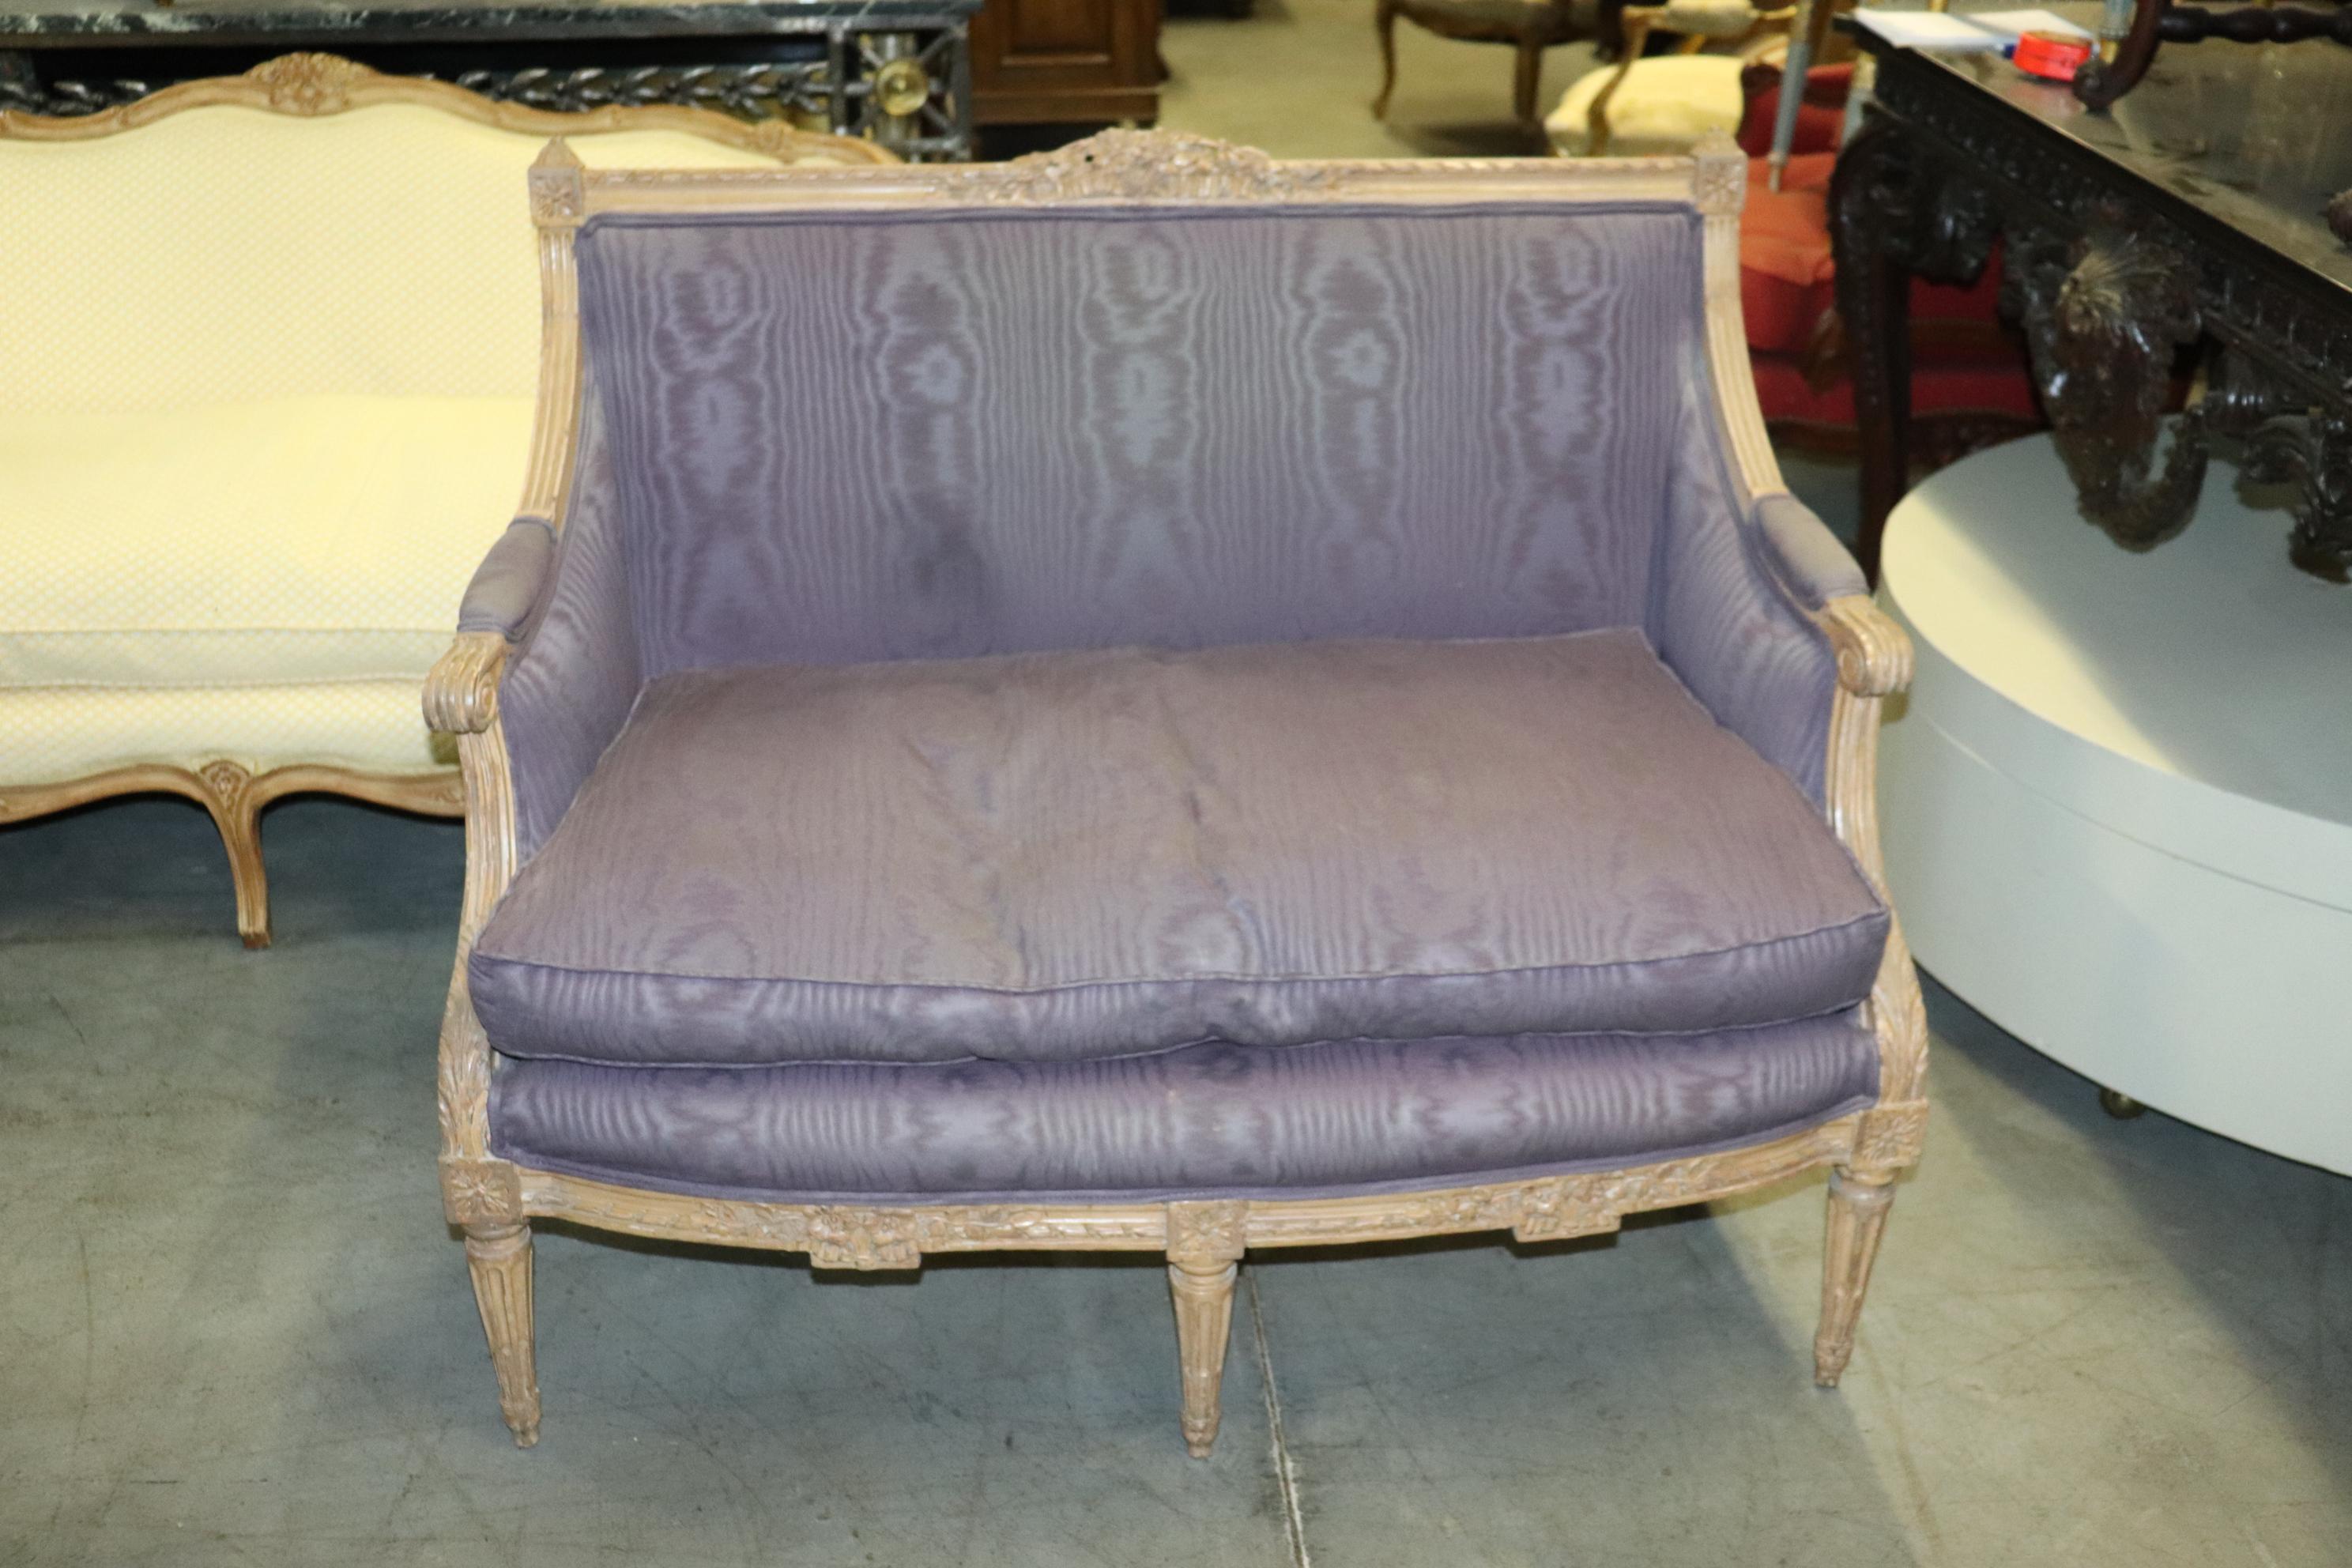 This is a rare size of settee, often called a marquis or smaller canape. The settee is in good original condition with incredible crisp carving and detail. The antique white painted finish has a great patina and the upholstery is in good condition